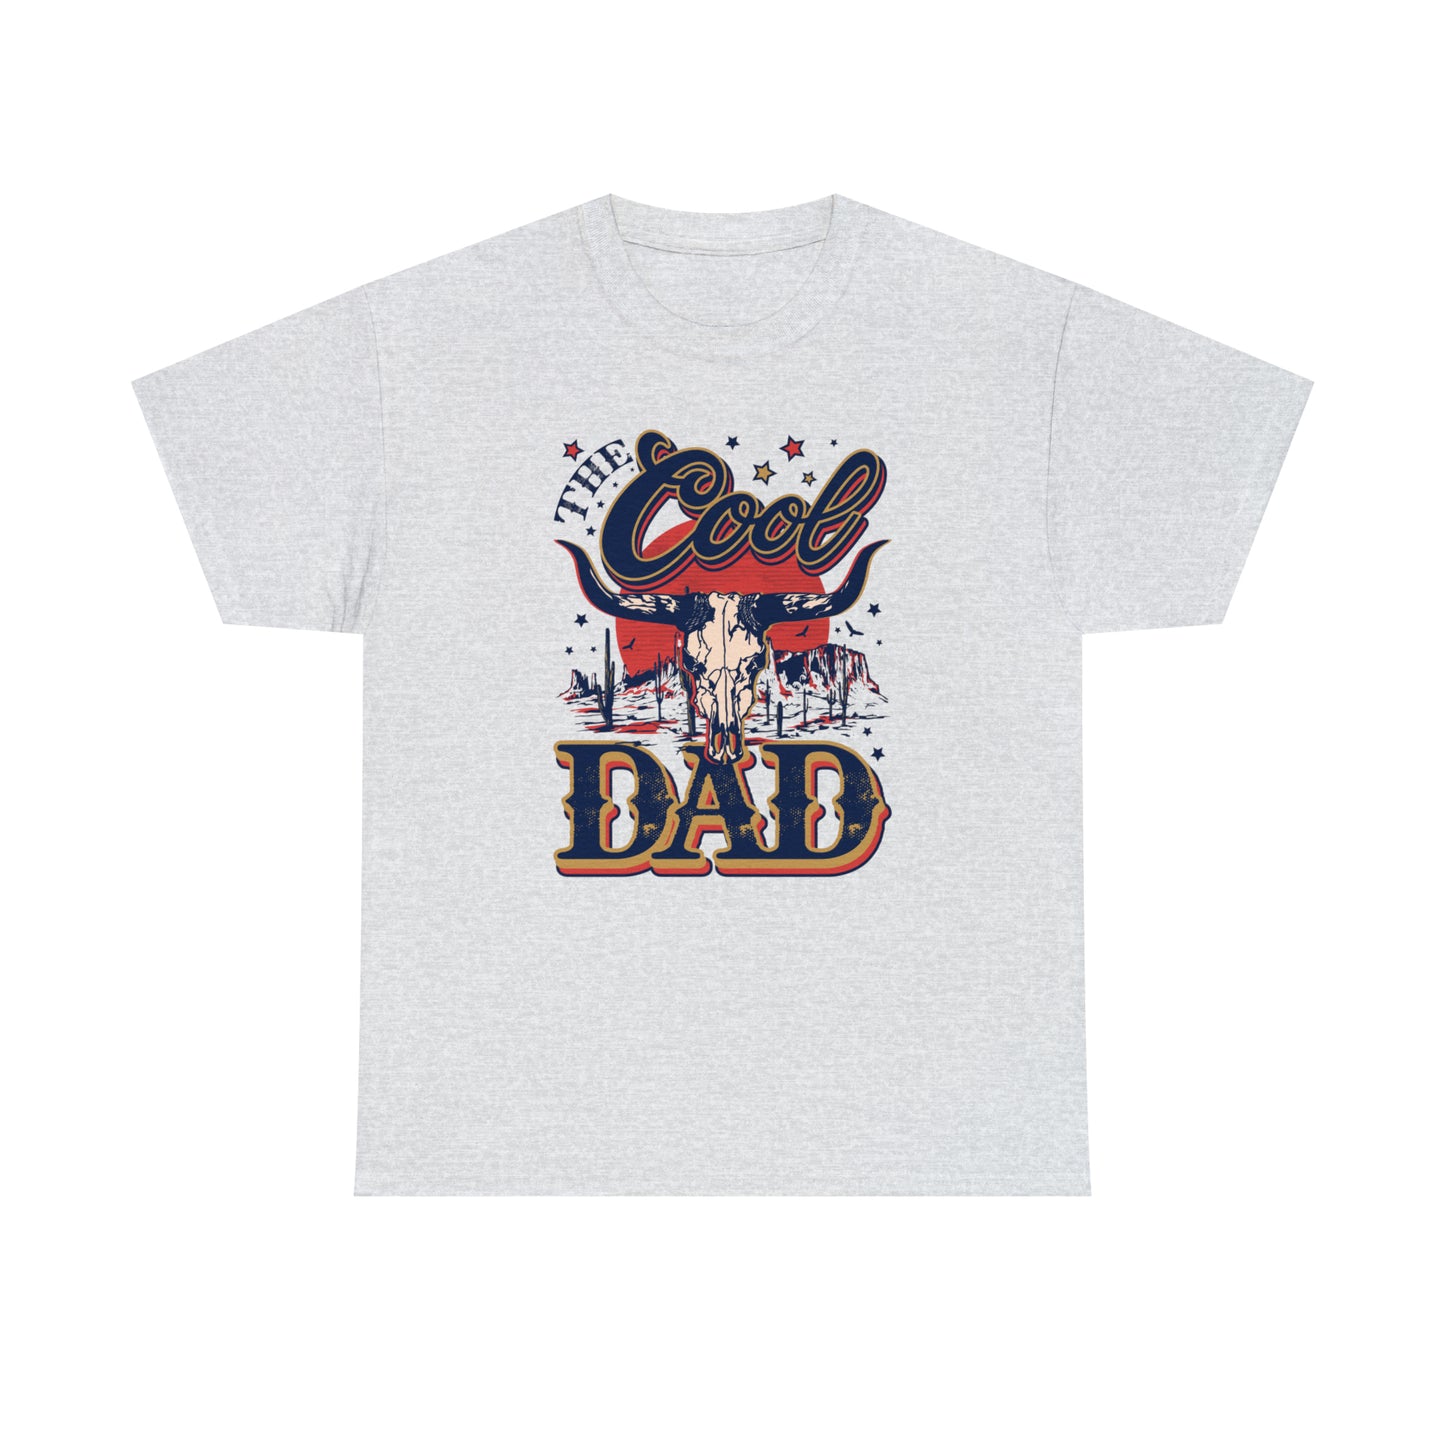 The Cool Dad Shirt